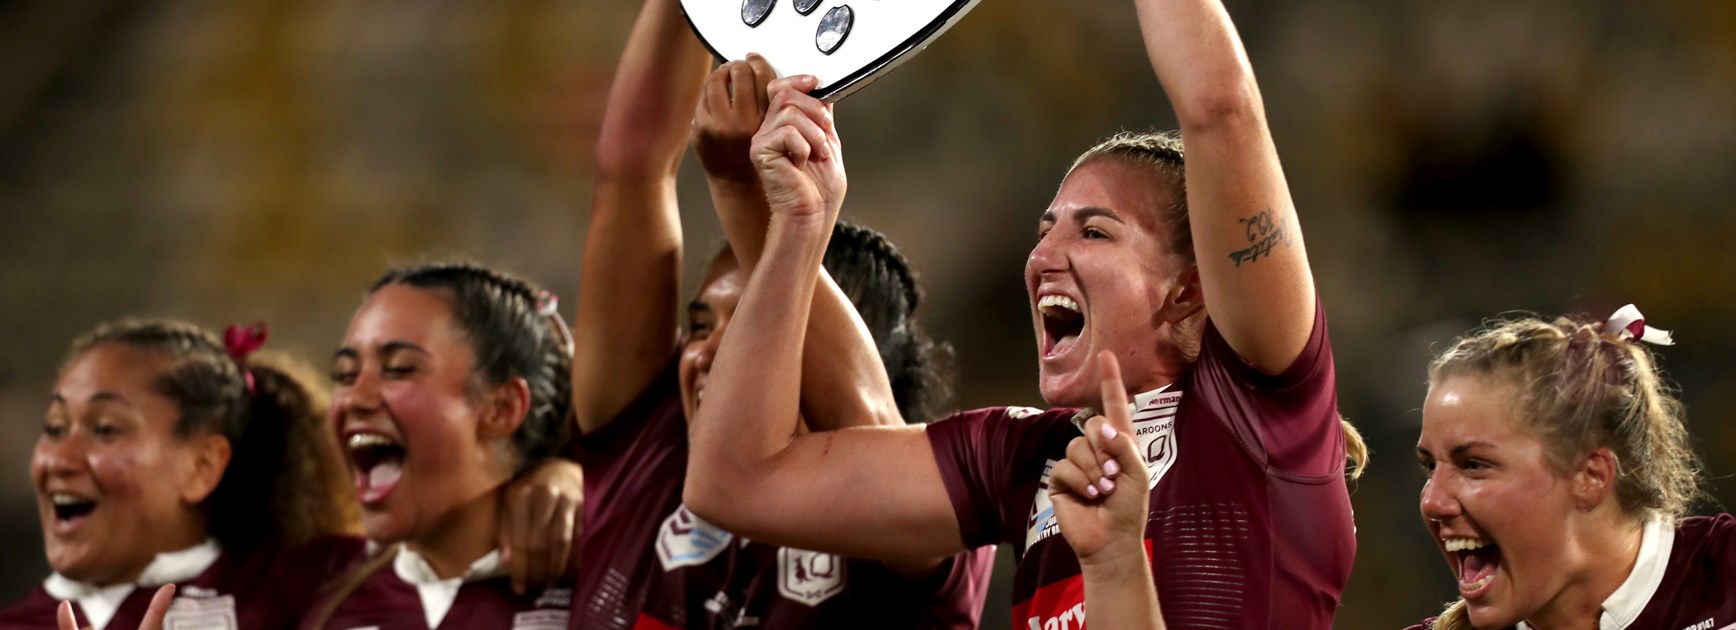 Women's State of Origin tickets are on sale